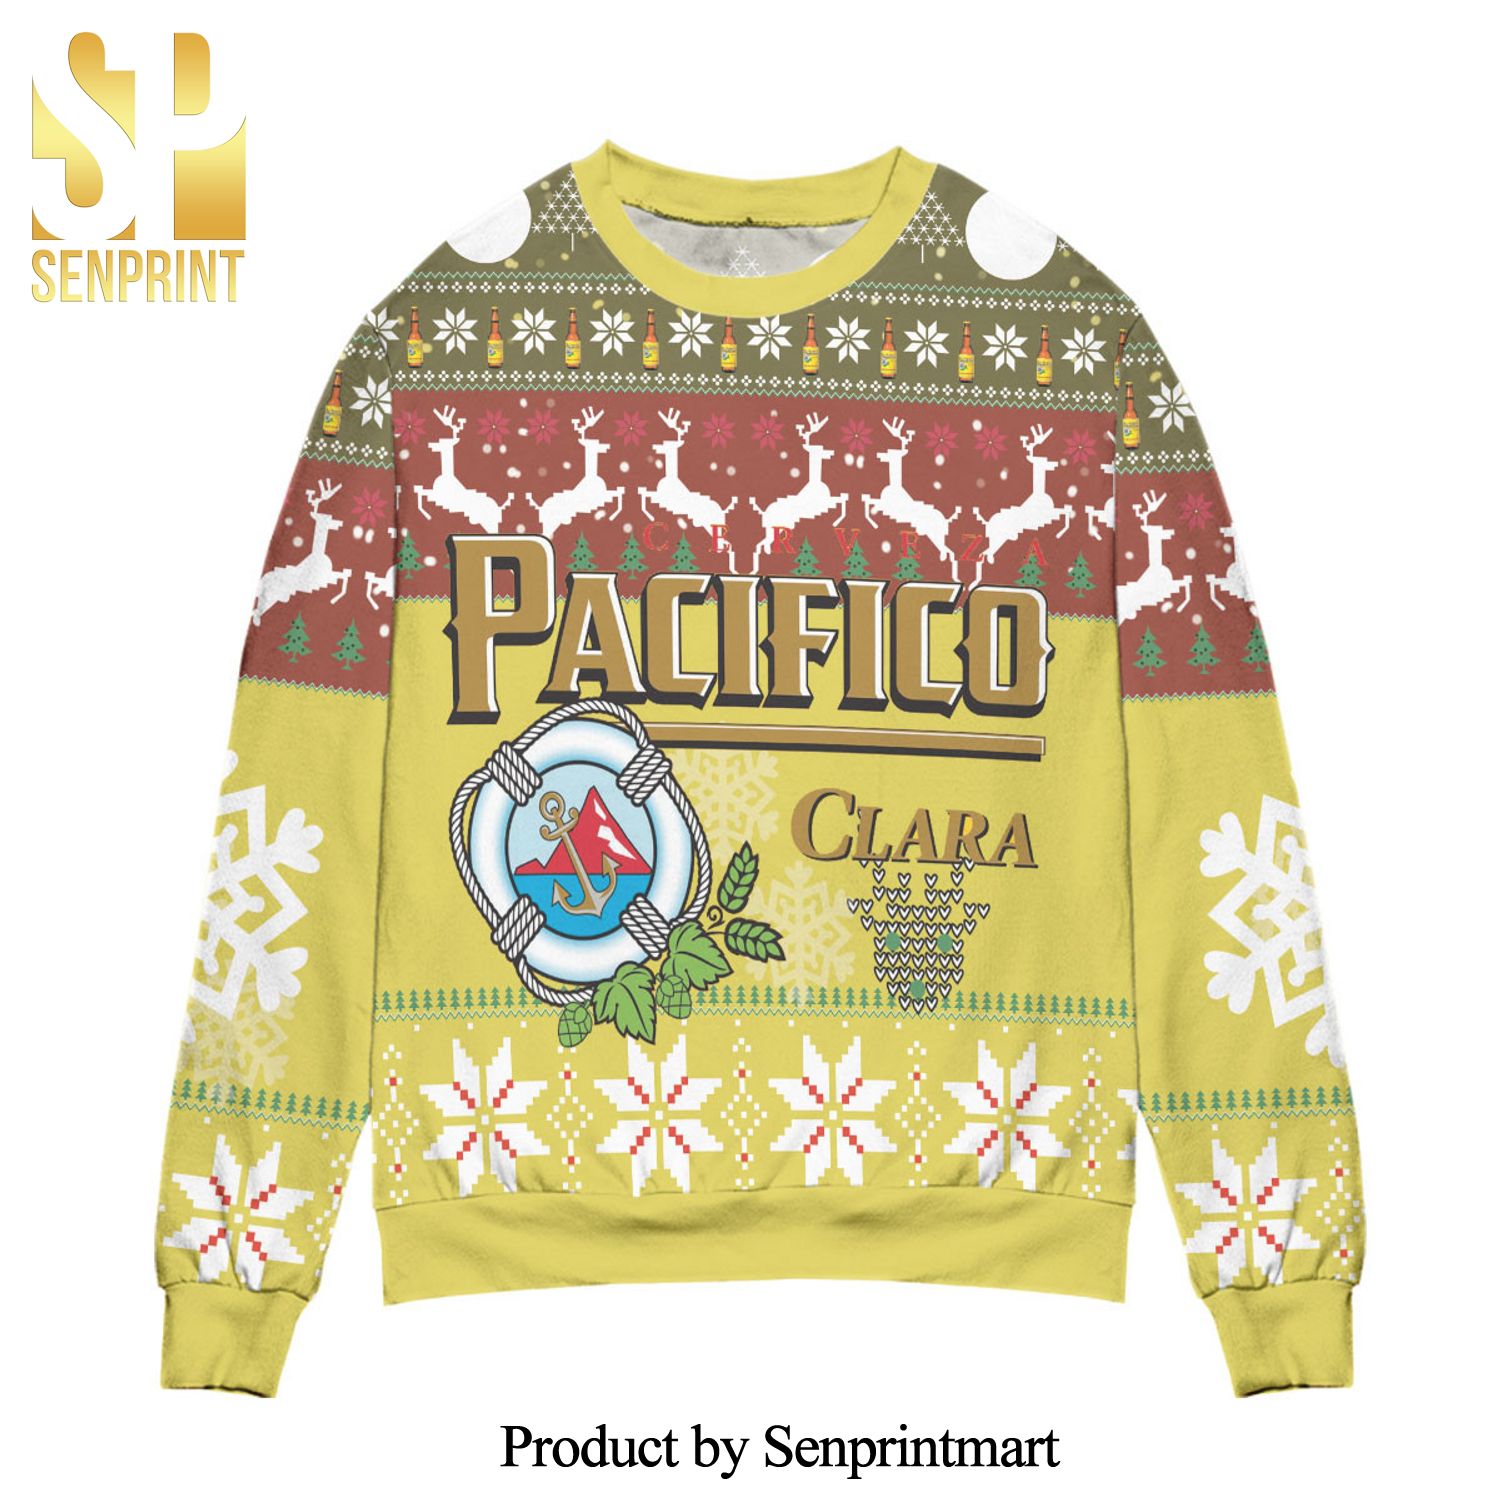 Cerveza Pacifico Clara Snowflake And Reindeer Pattern Knitted Ugly Christmas Sweater – Yellow